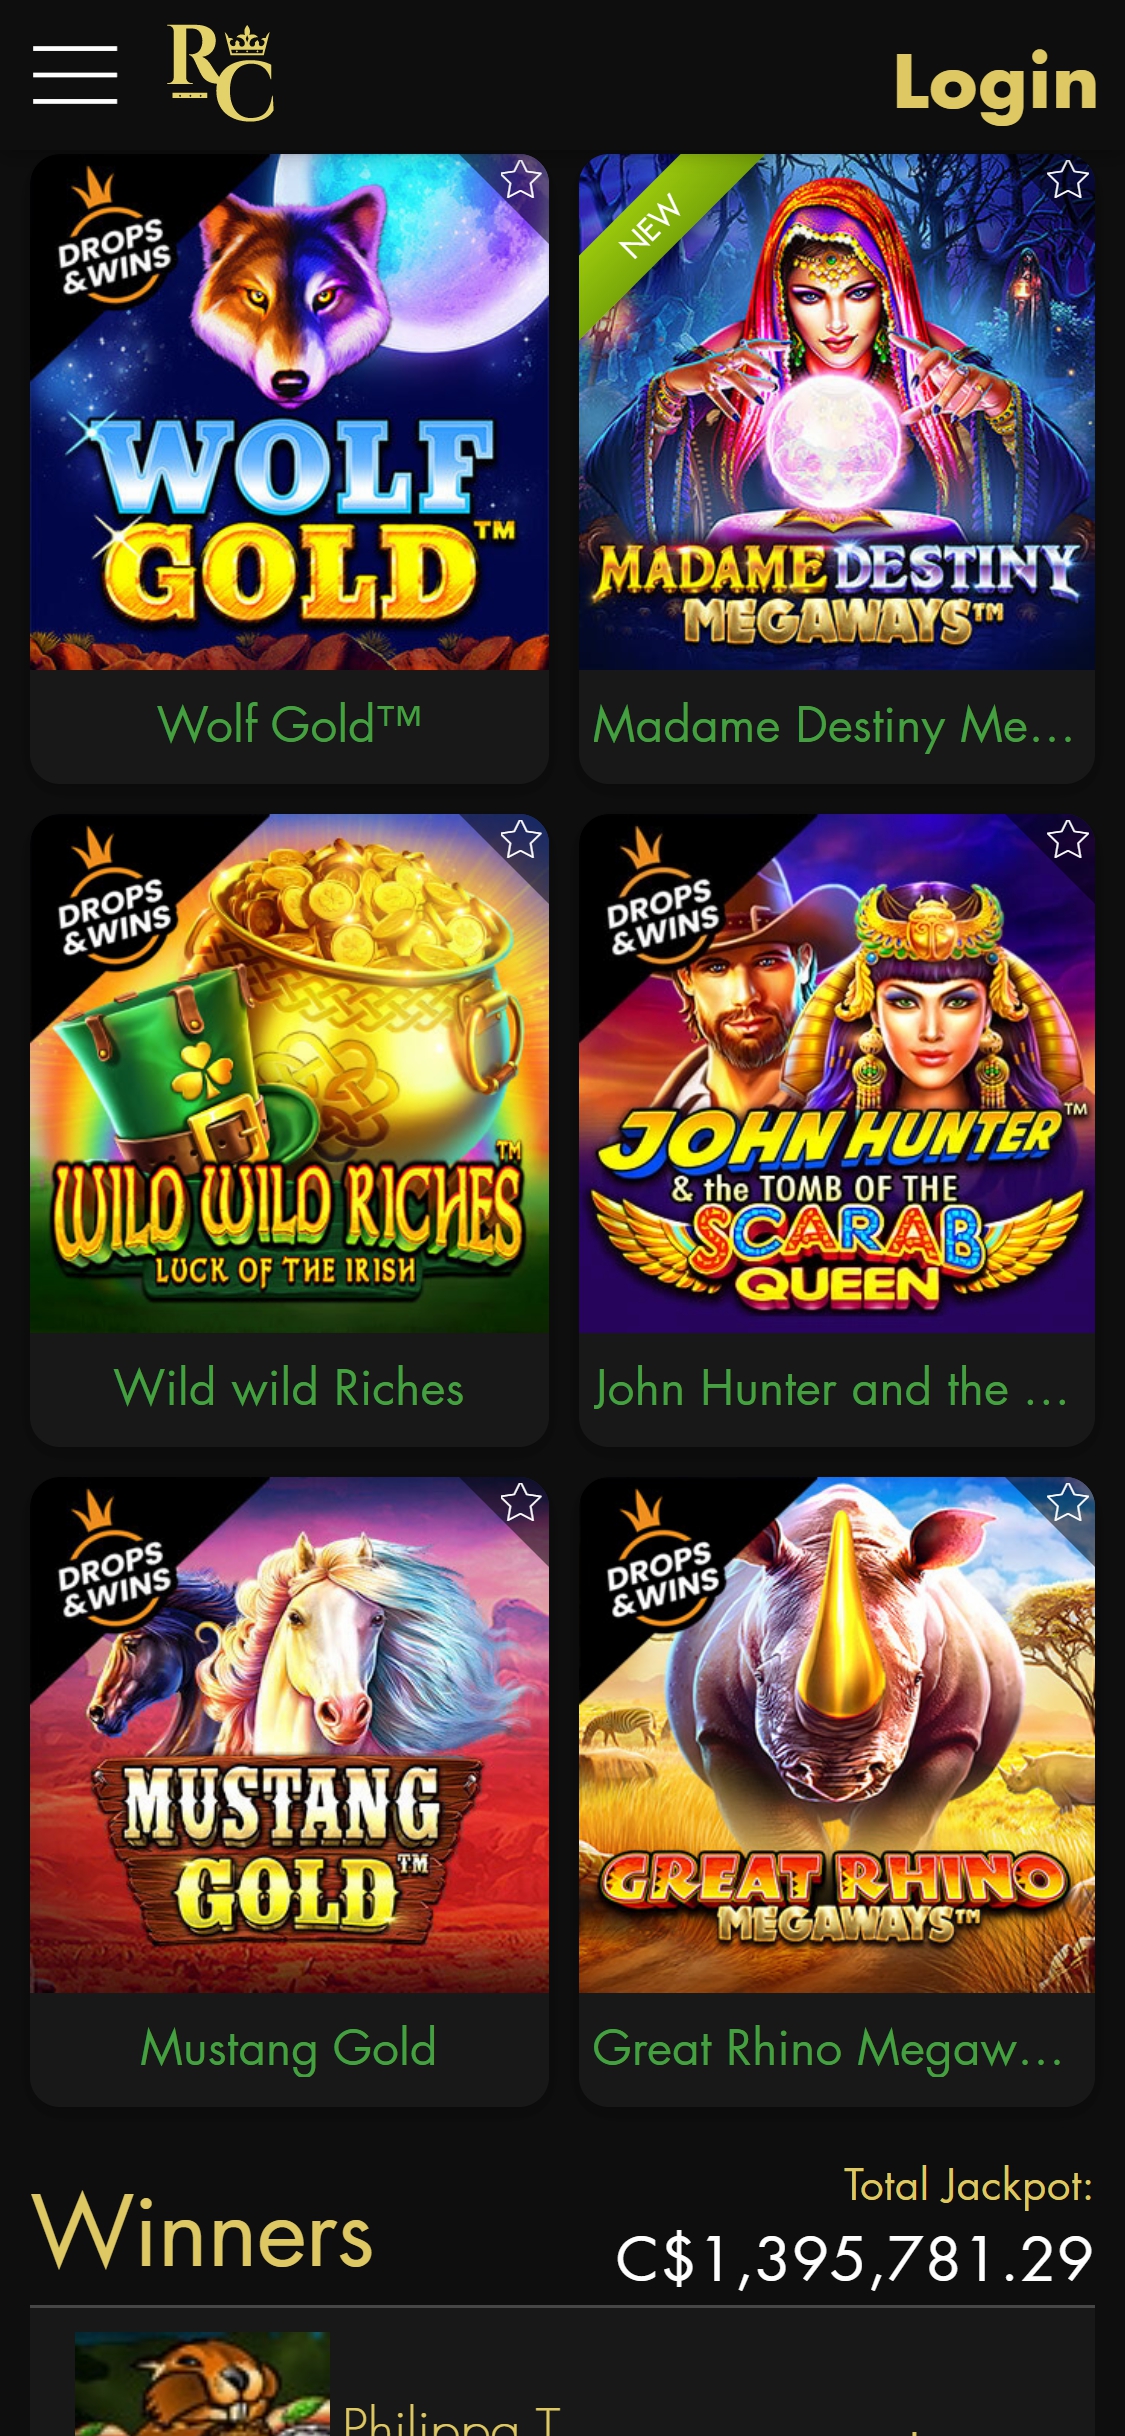 Rich Casino Mobile Games Review